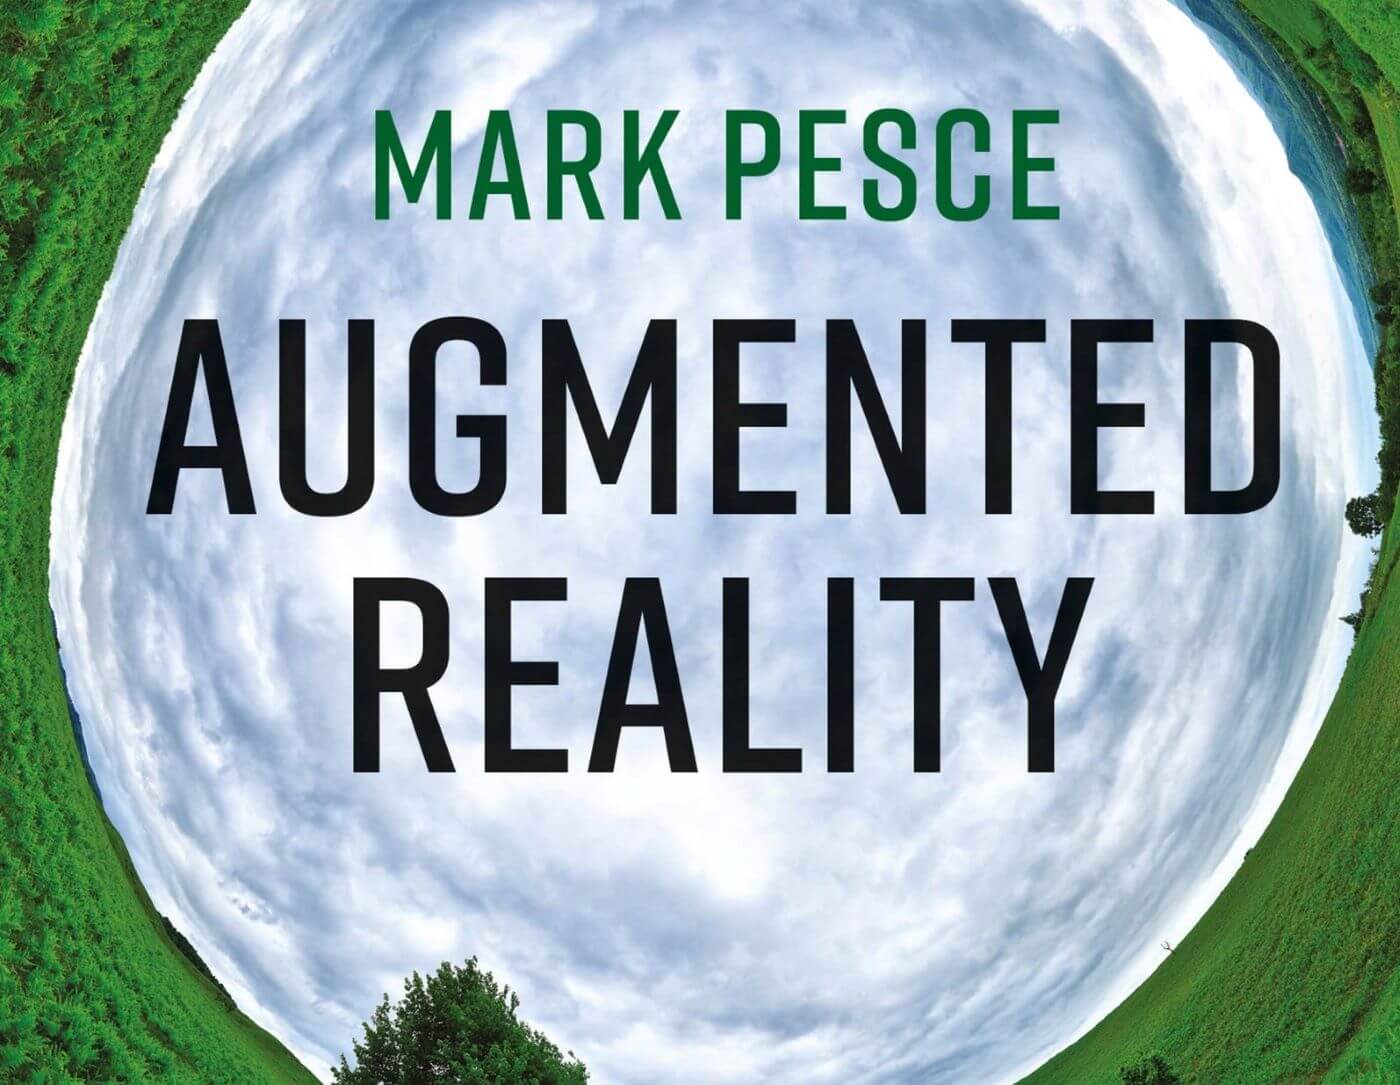 Book Review - Mark Pesce’s Augmented Reality- Unboxing Tech’s Next Big Thing